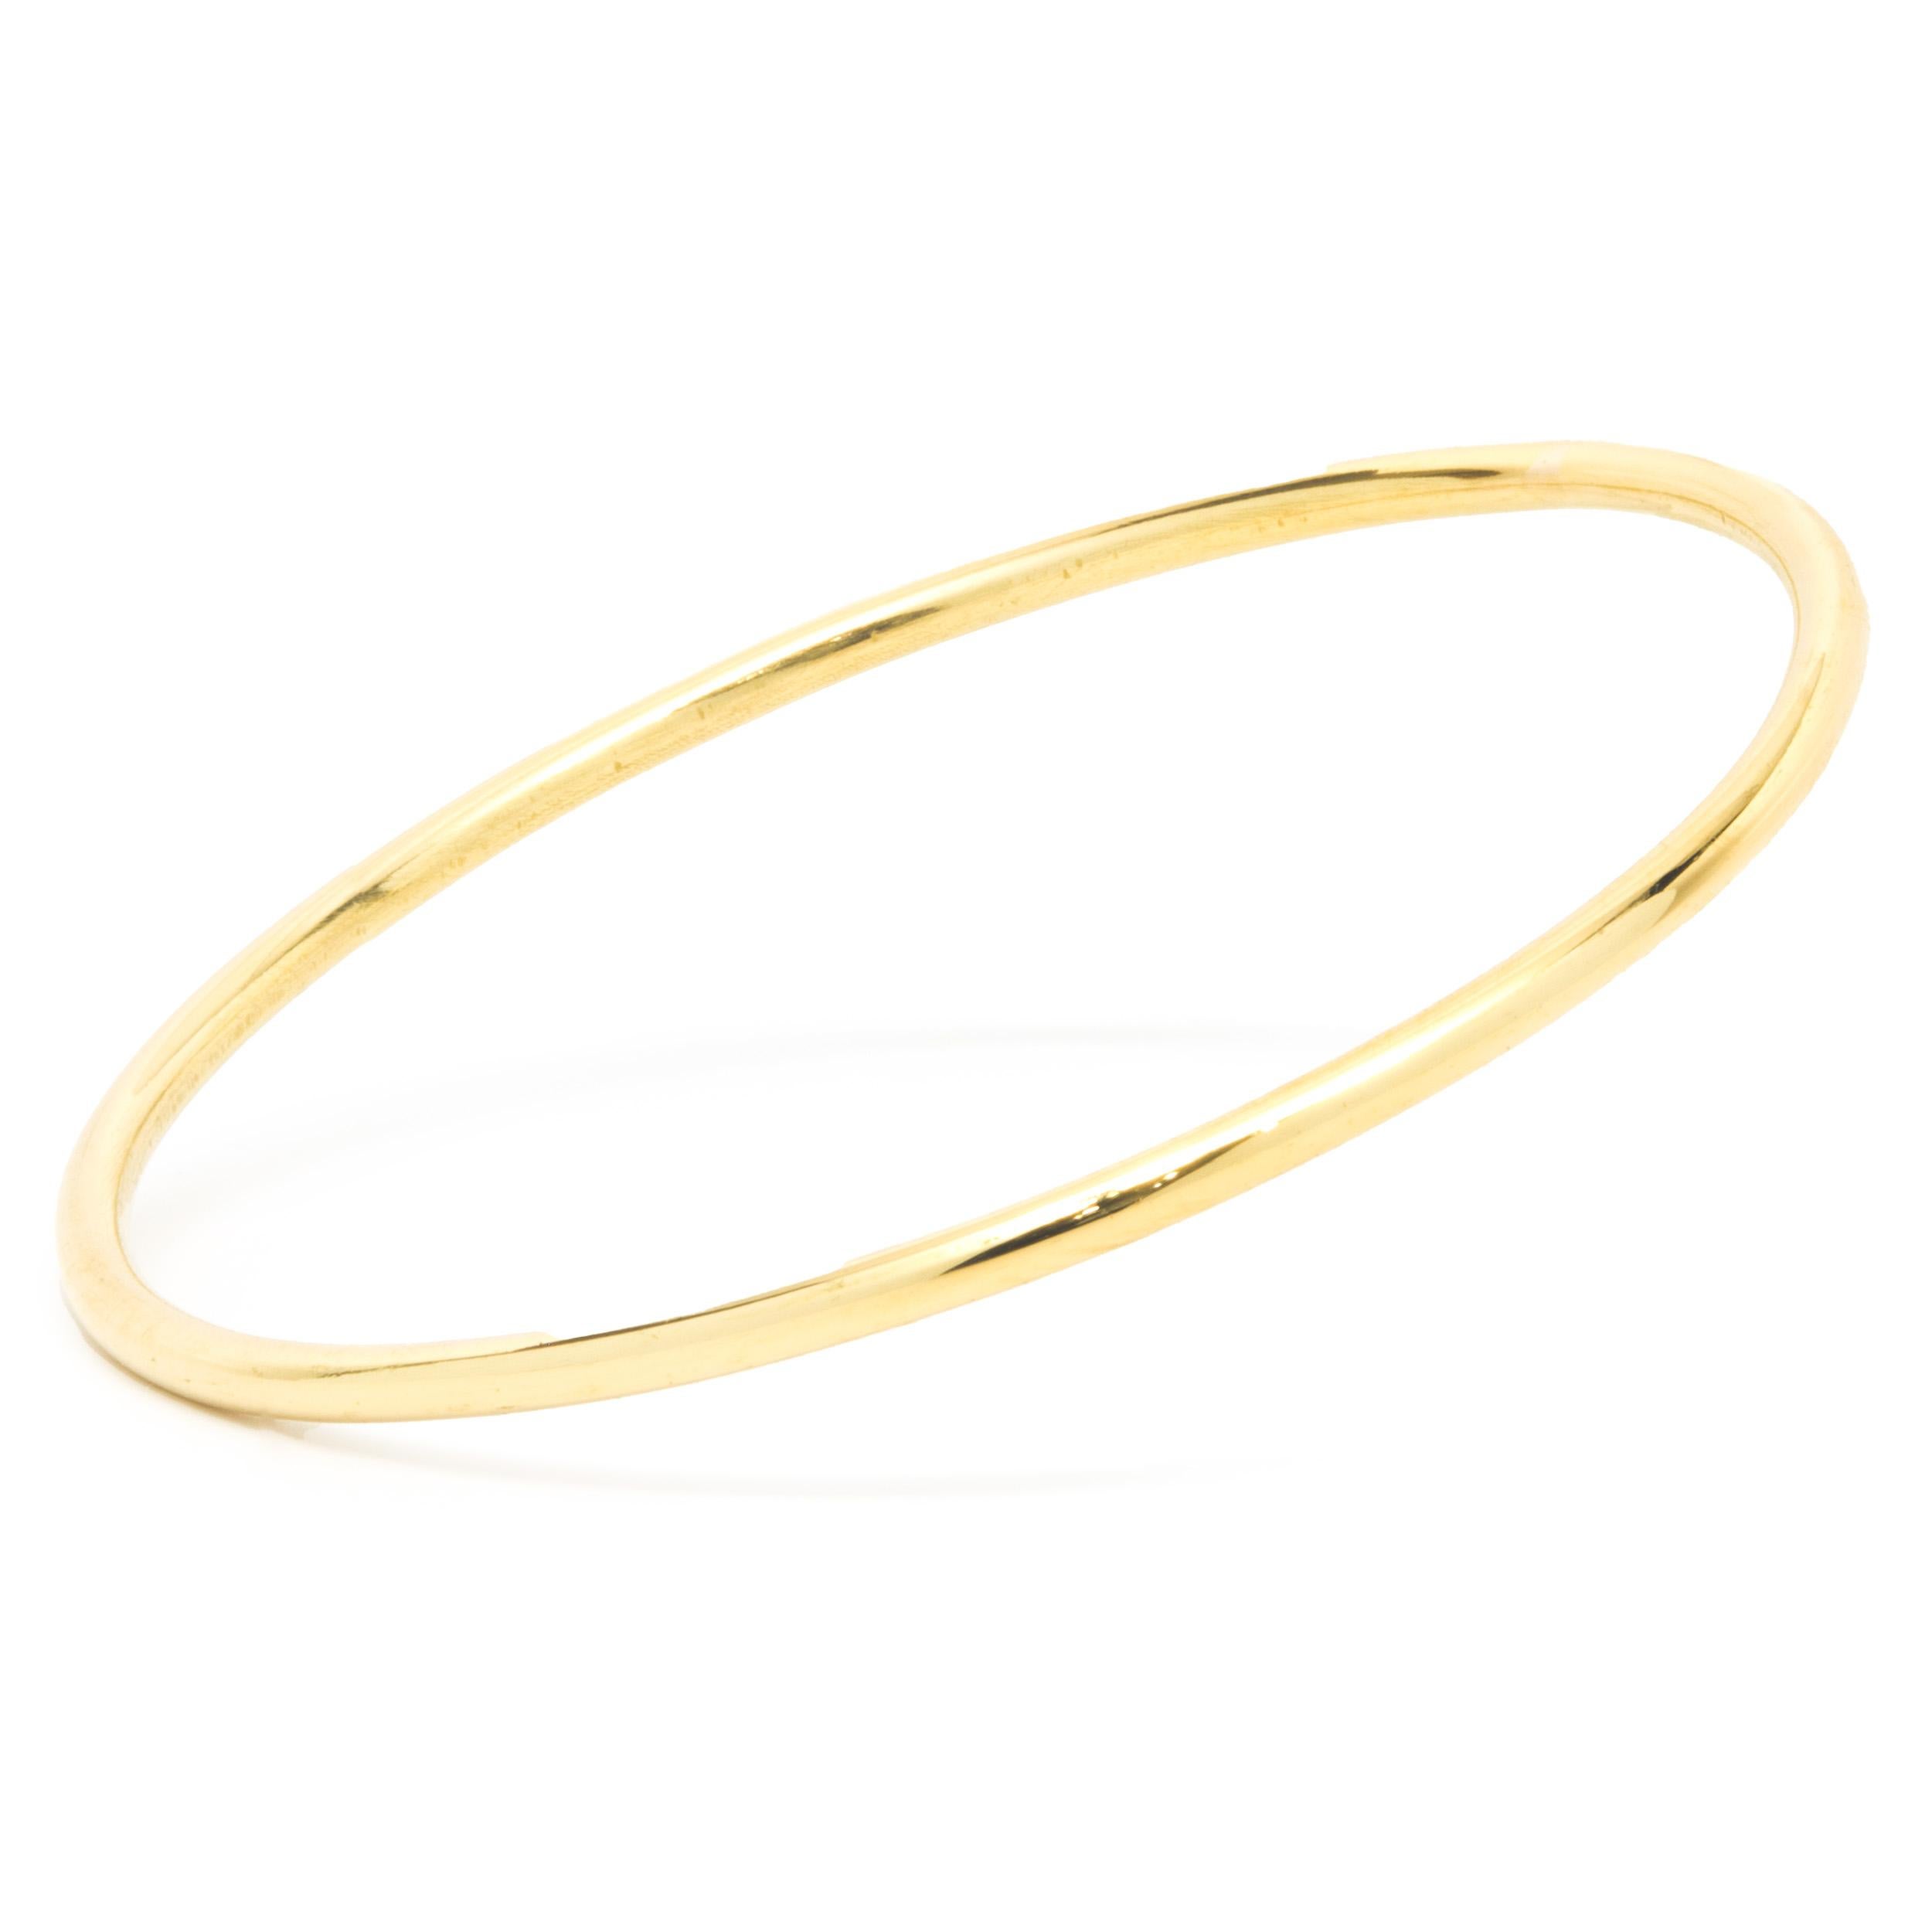 18 Karat Yellow Gold Bangle Bracelet In Excellent Condition For Sale In Scottsdale, AZ